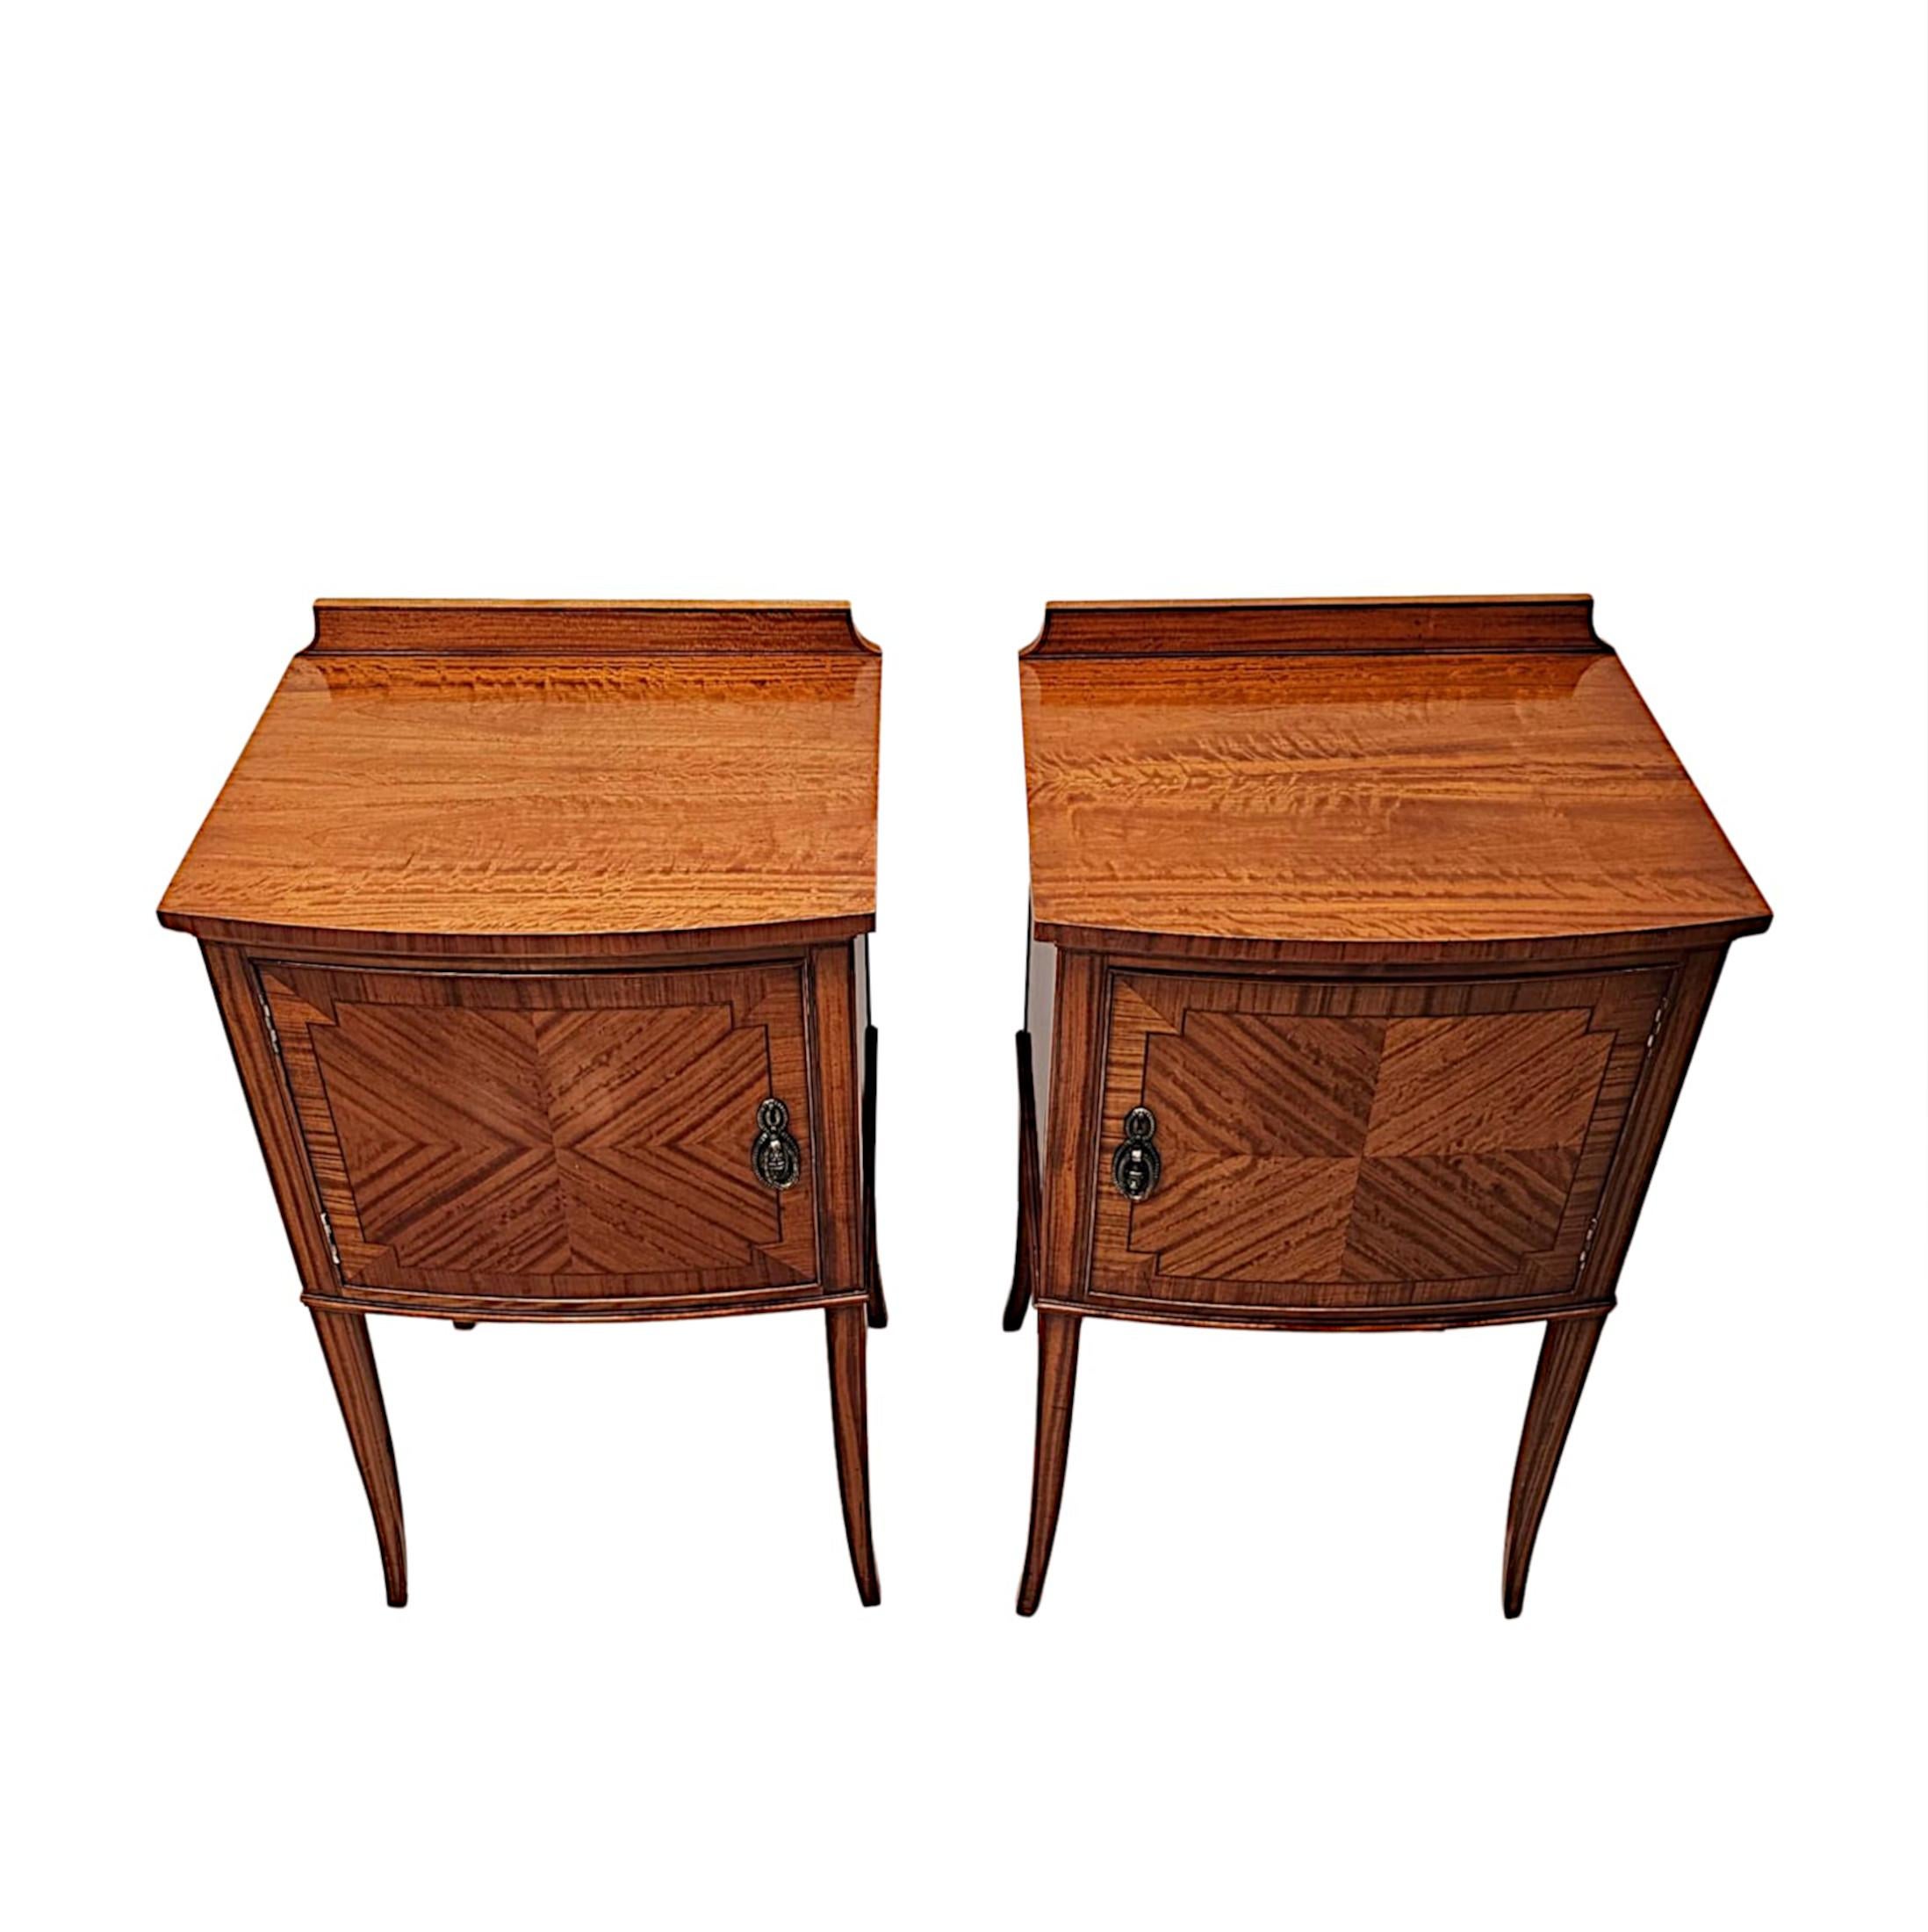 A fabulous pair of Edwardian satinwood bedside cabinets, finely carved with gorgeously rich patination, grain and with beautifully detailed crossbanding, quarter veneer and inlay throughout.  The well figured, moulded, bowfront top of rectangular